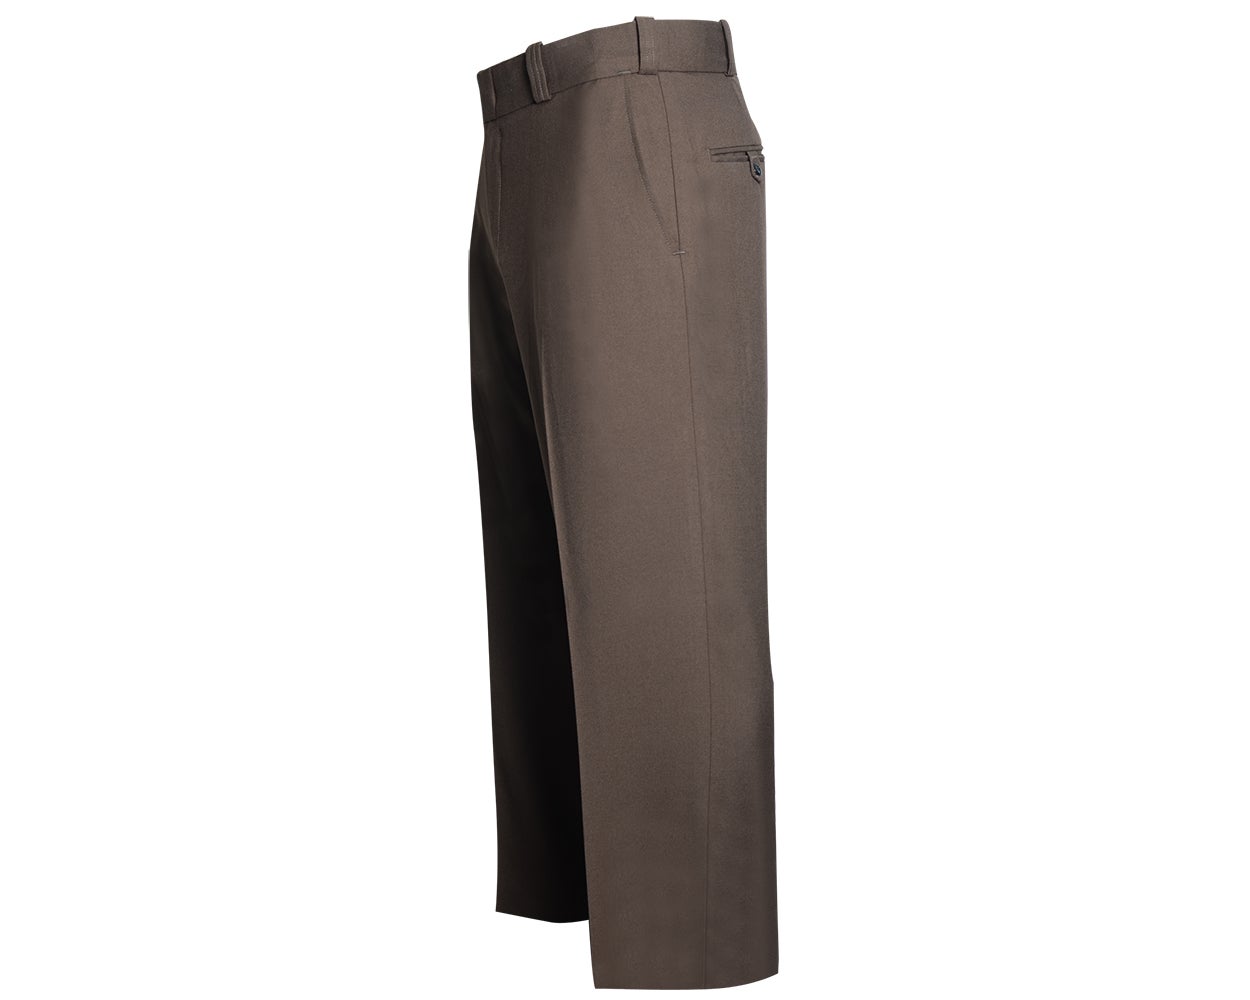 Flying Cross Justice 75% Poly/25% Wool Women's Uniform Pants with Freedom Flex Waistband